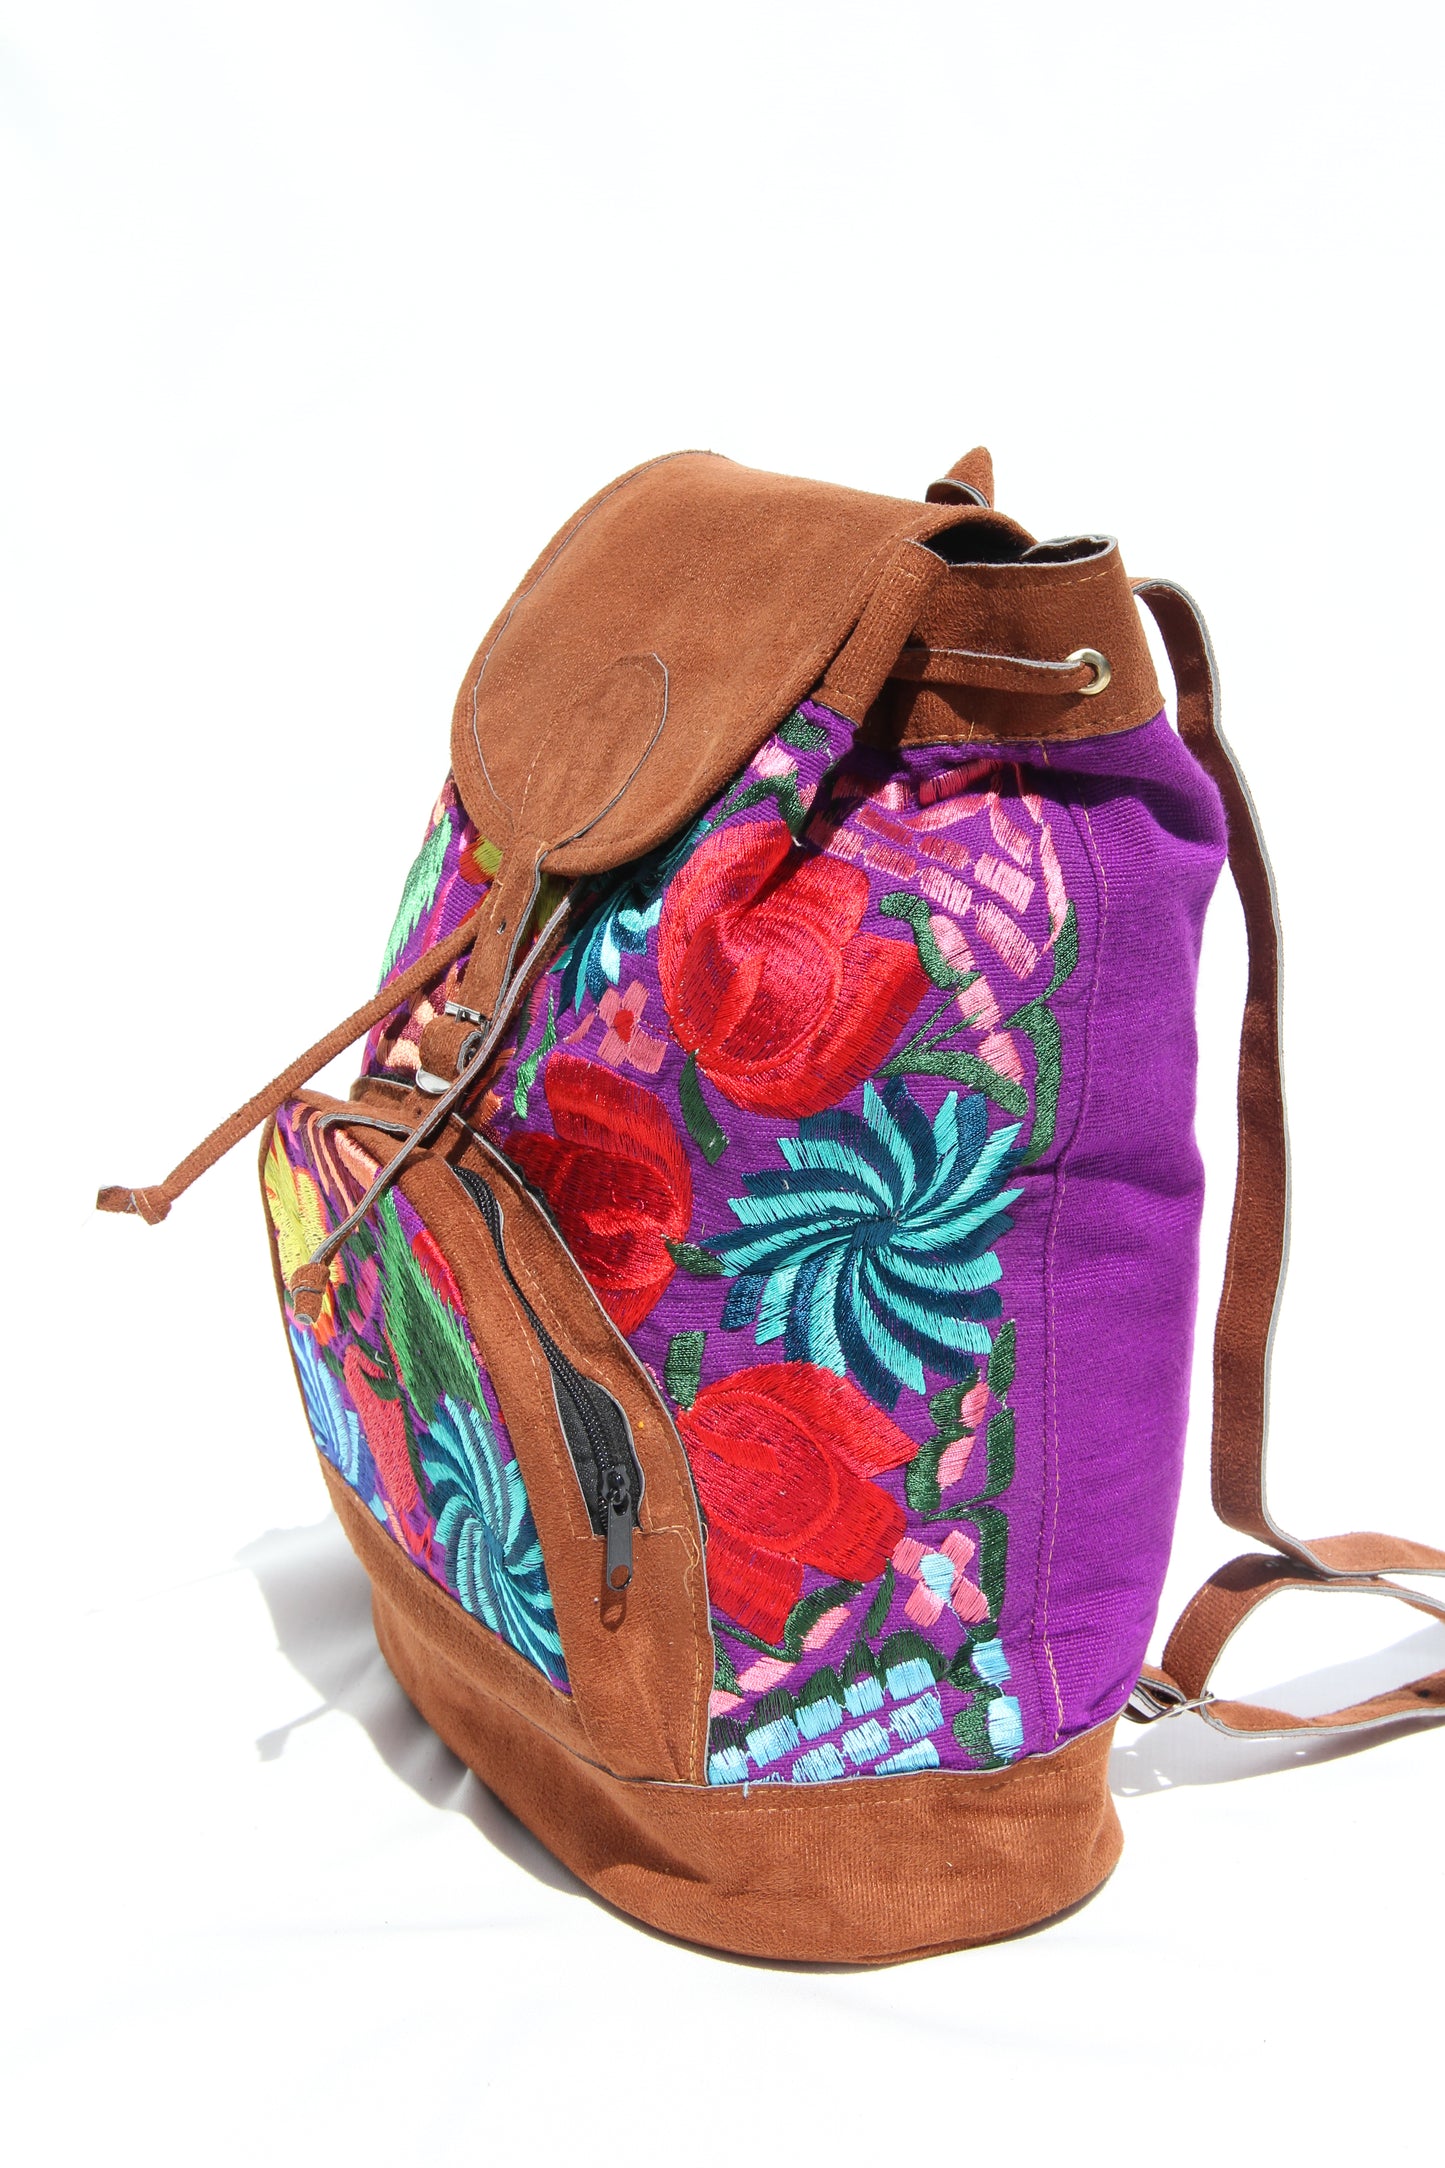 colorful huipil floral embroidery backpack purple woven fabric and faux suede contrast with adjustable straps and front buckle closure with front zipper pocket the prefect travel, hiking or beach bag unique bag great for back to school take this bag on your next destination boho bag and hippie style bag a great standout accessories made in Guatemala